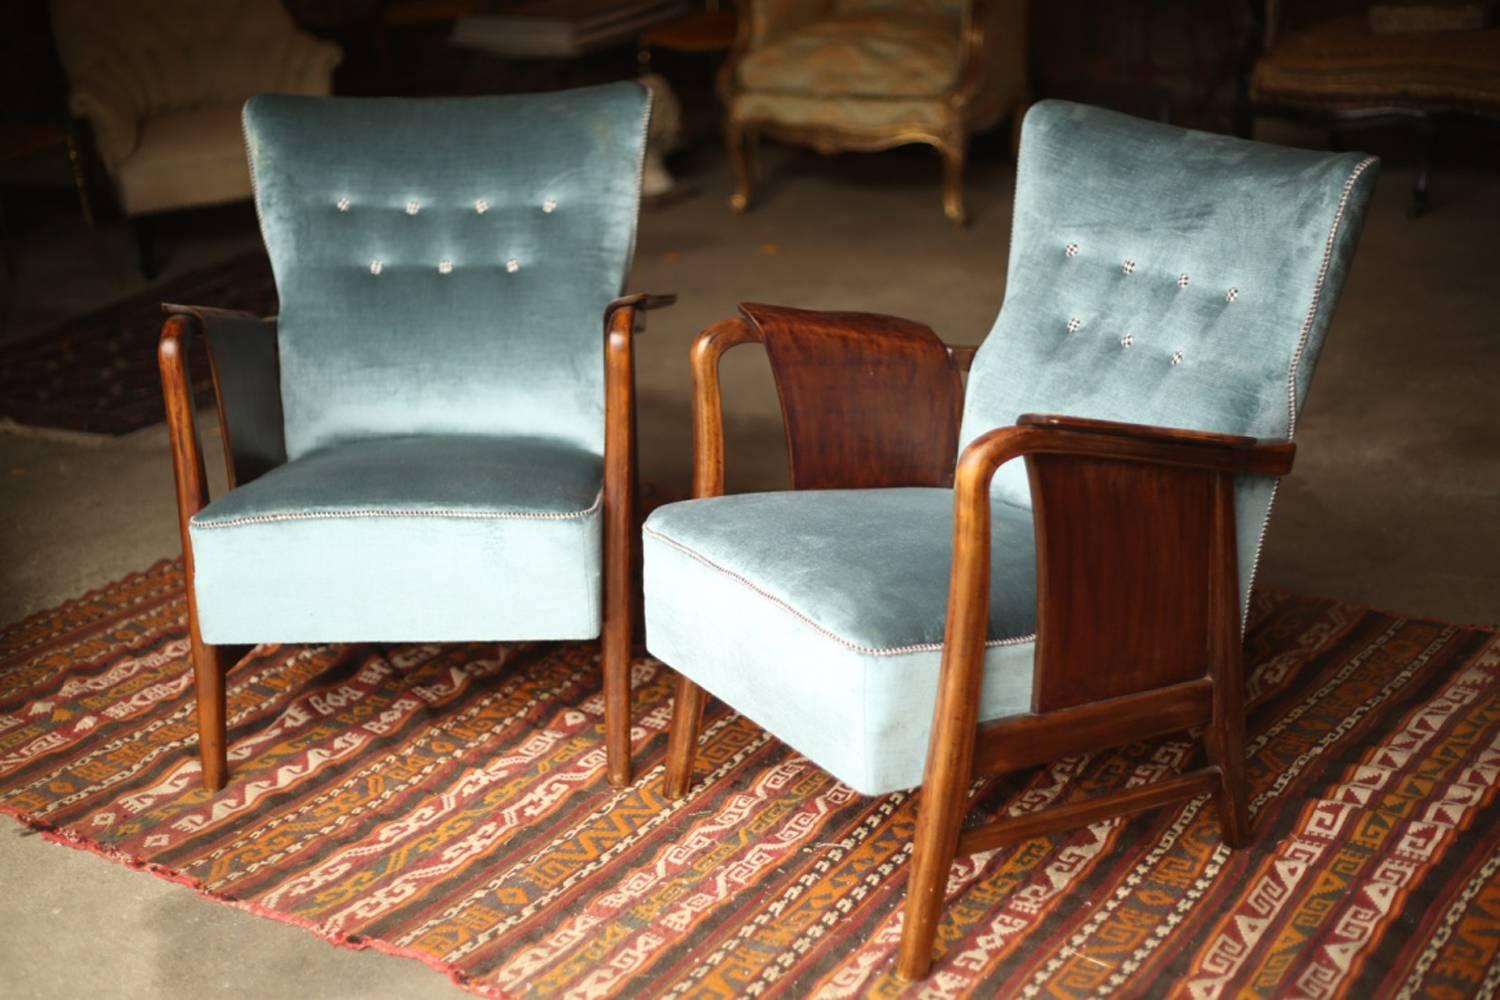 These are a very stylish pair of midcentury Danish designed armchairs. The shape of these chairs makes them extremely attractive and very elegant. The upholstery is not original nor new but it is in extremely good condition with only light wear to